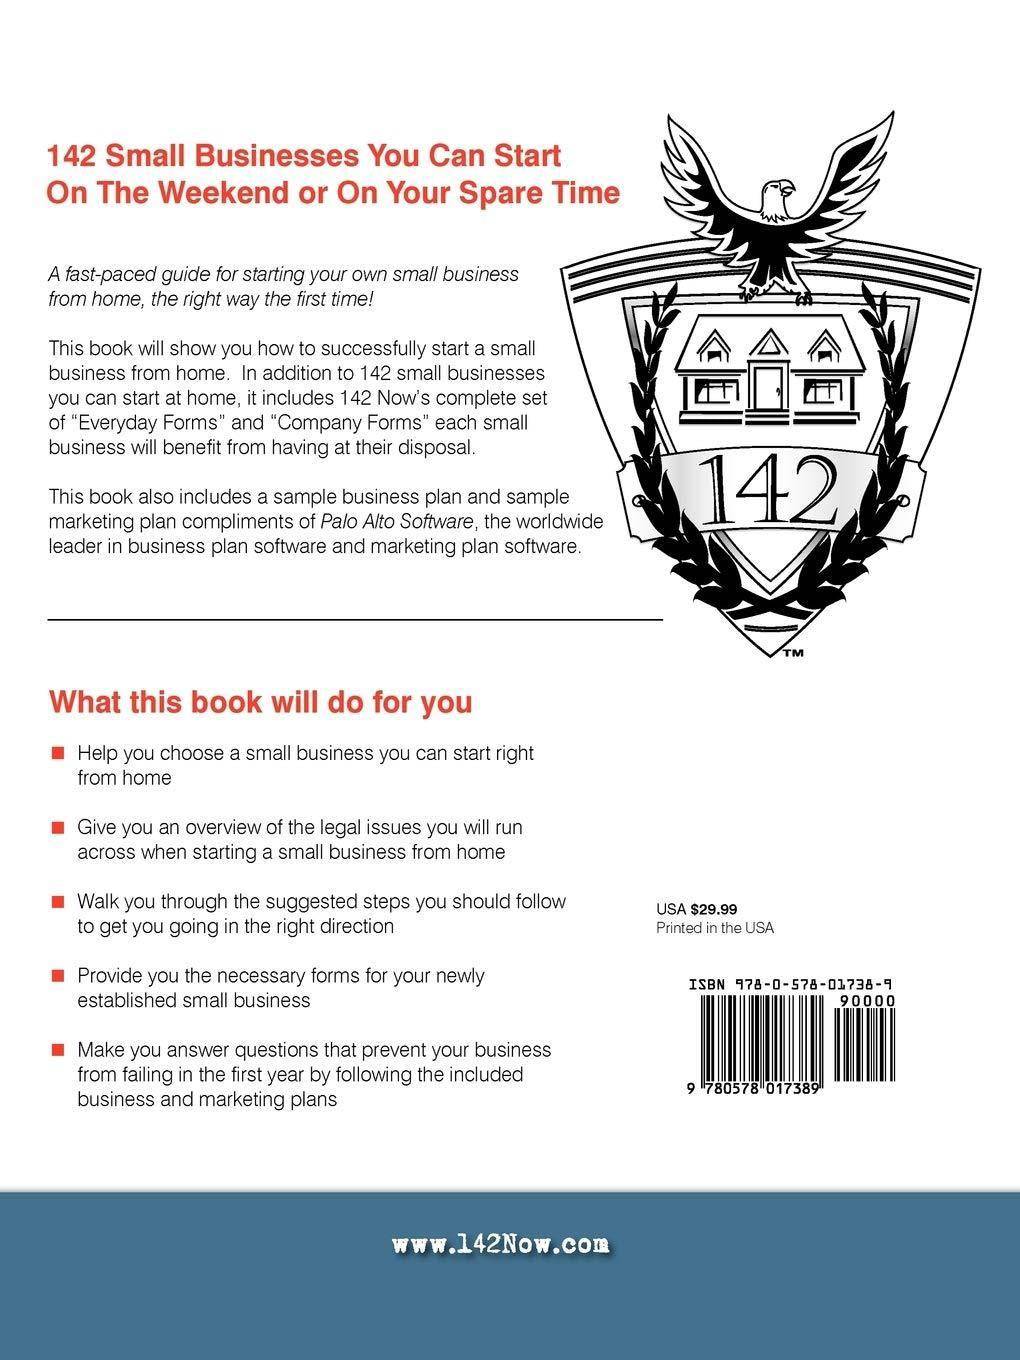 142 Small Businesses You Can Start On The Weekend or On Your Spa - SureShot Books Publishing LLC